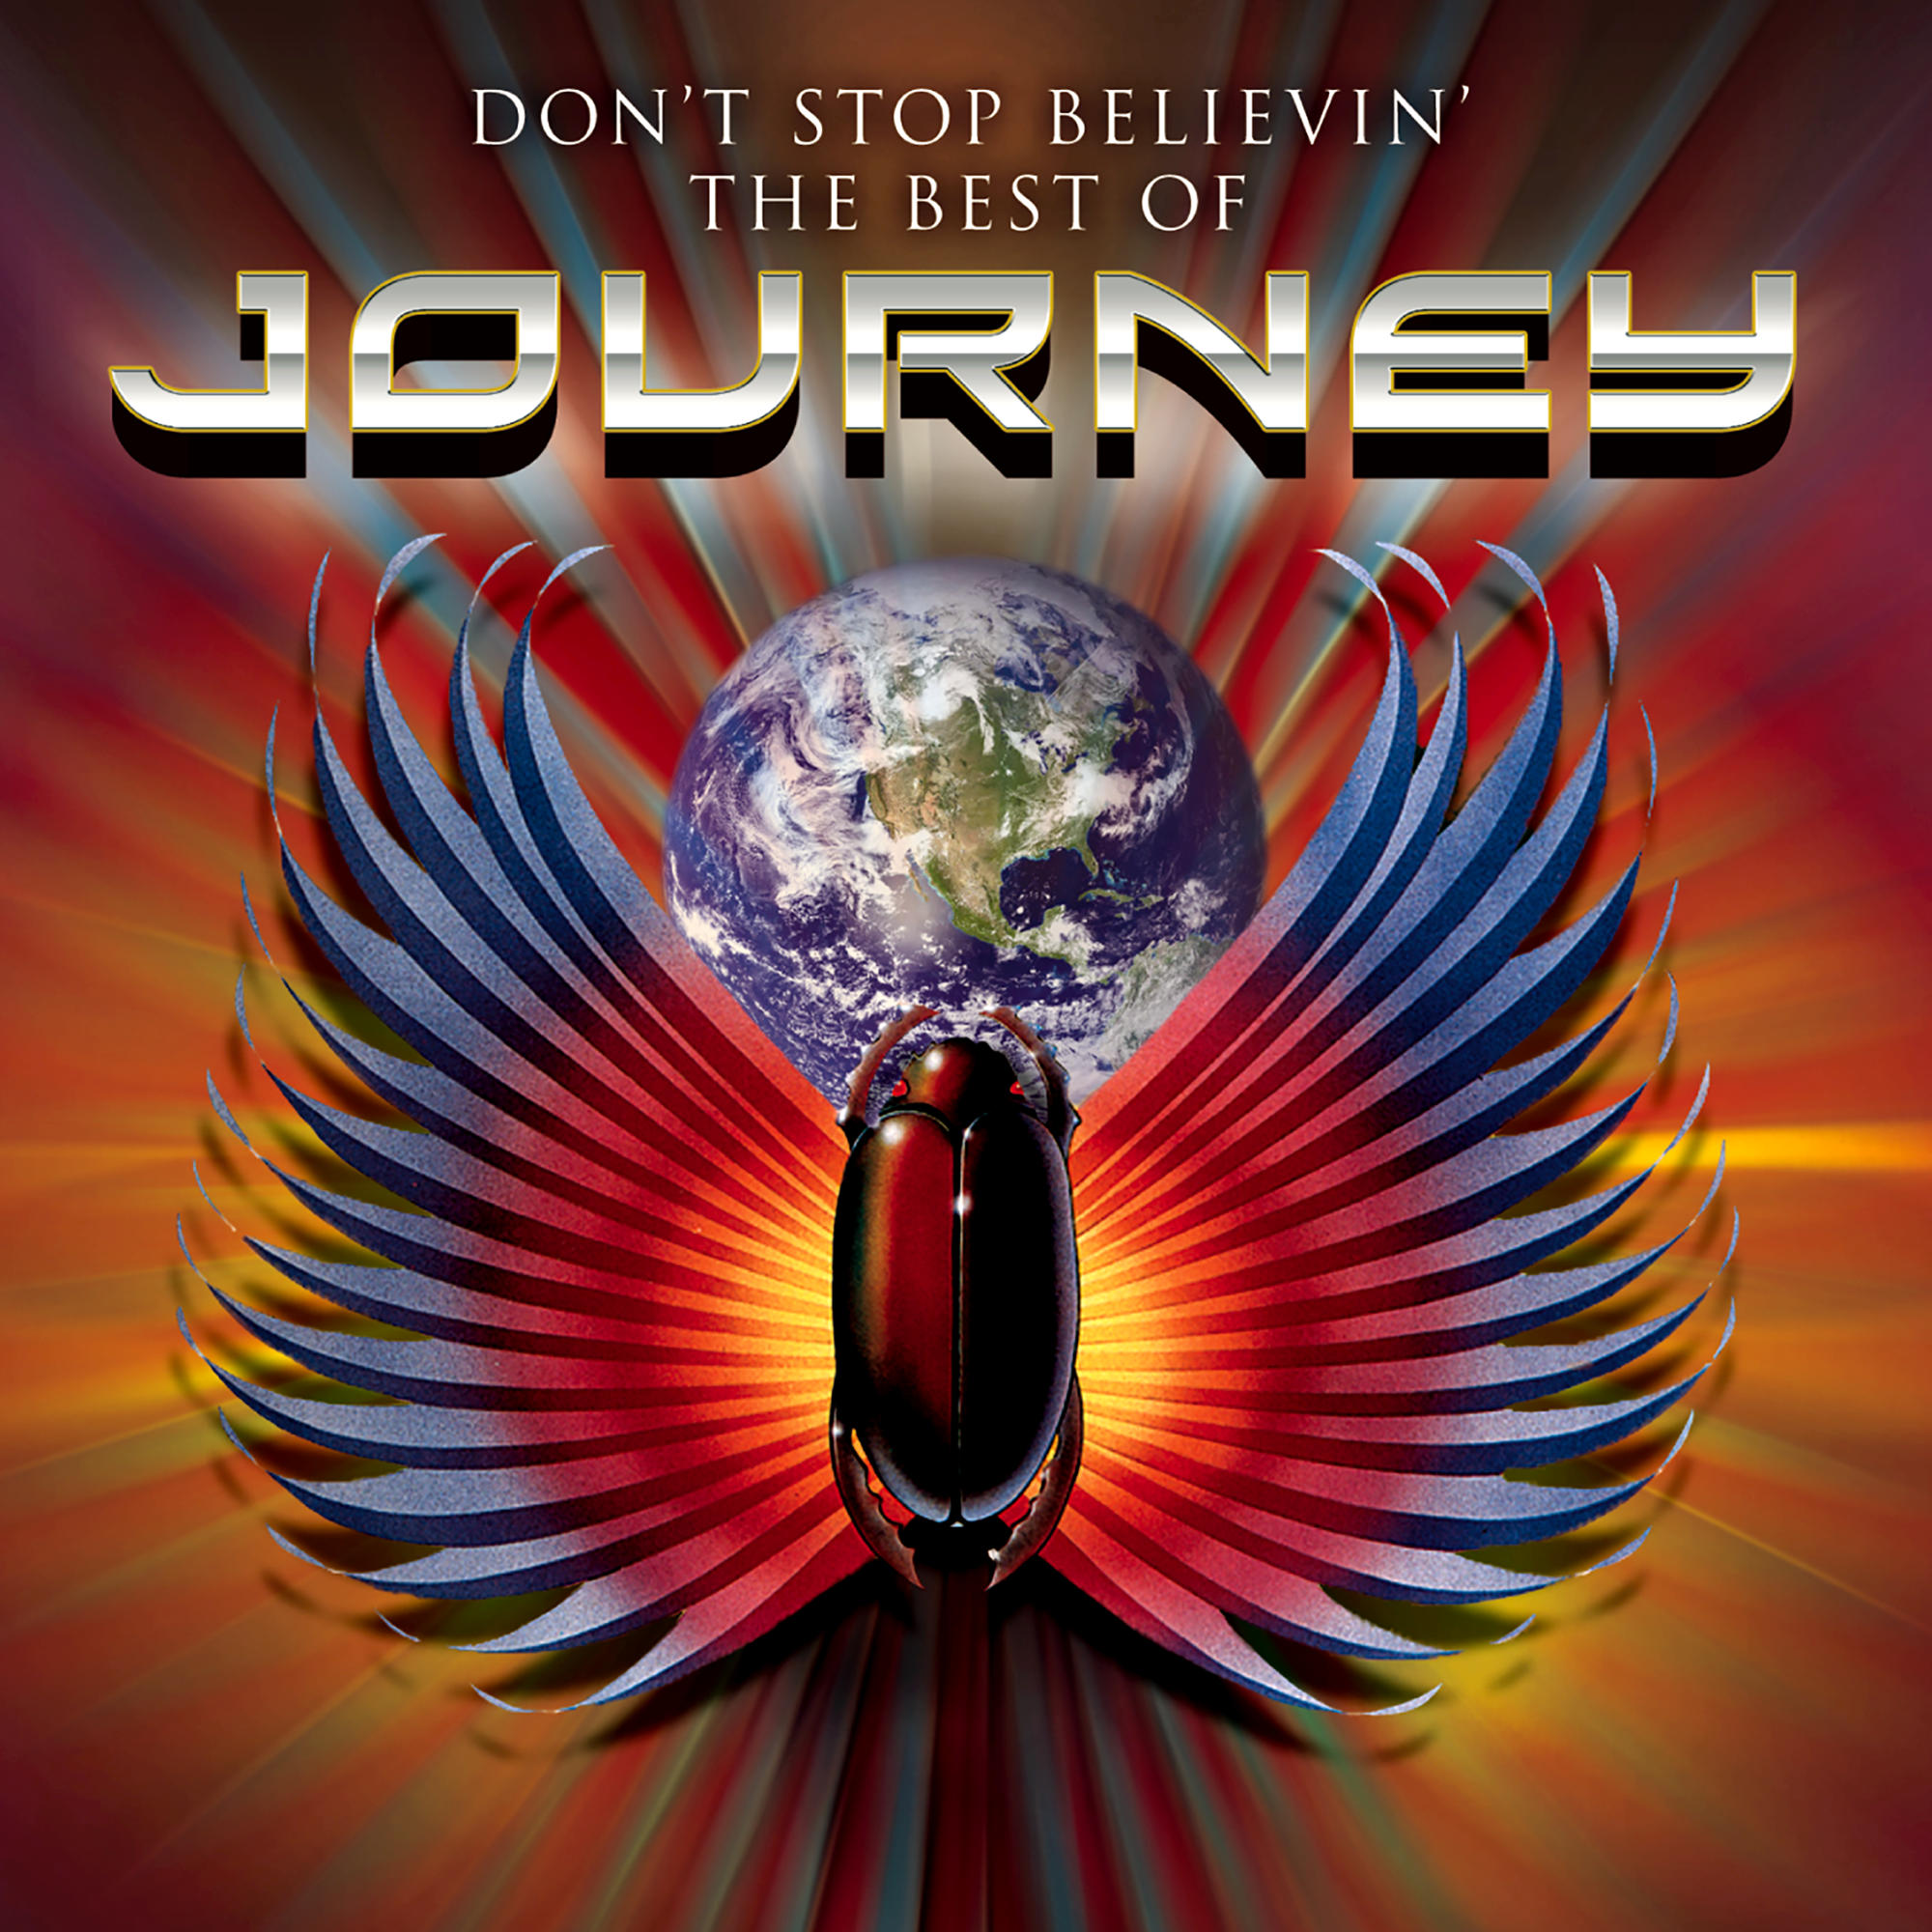 The Journey - Of Don\'t (CD) Journey - Stop Best Believin\':